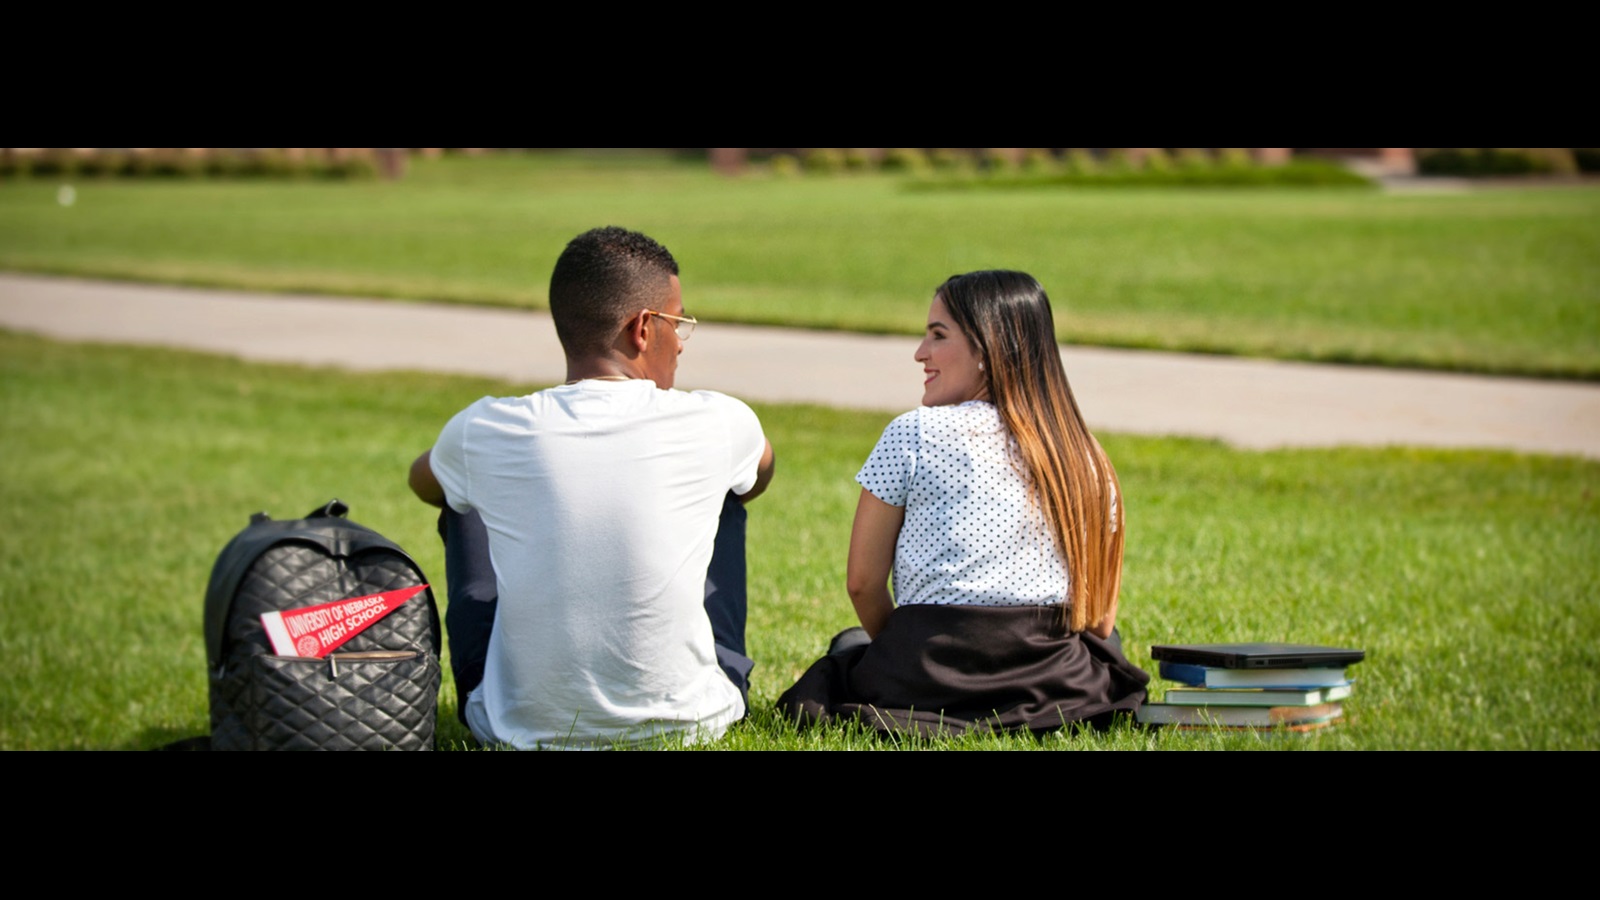 Two UNHS students sitting on lawn talking